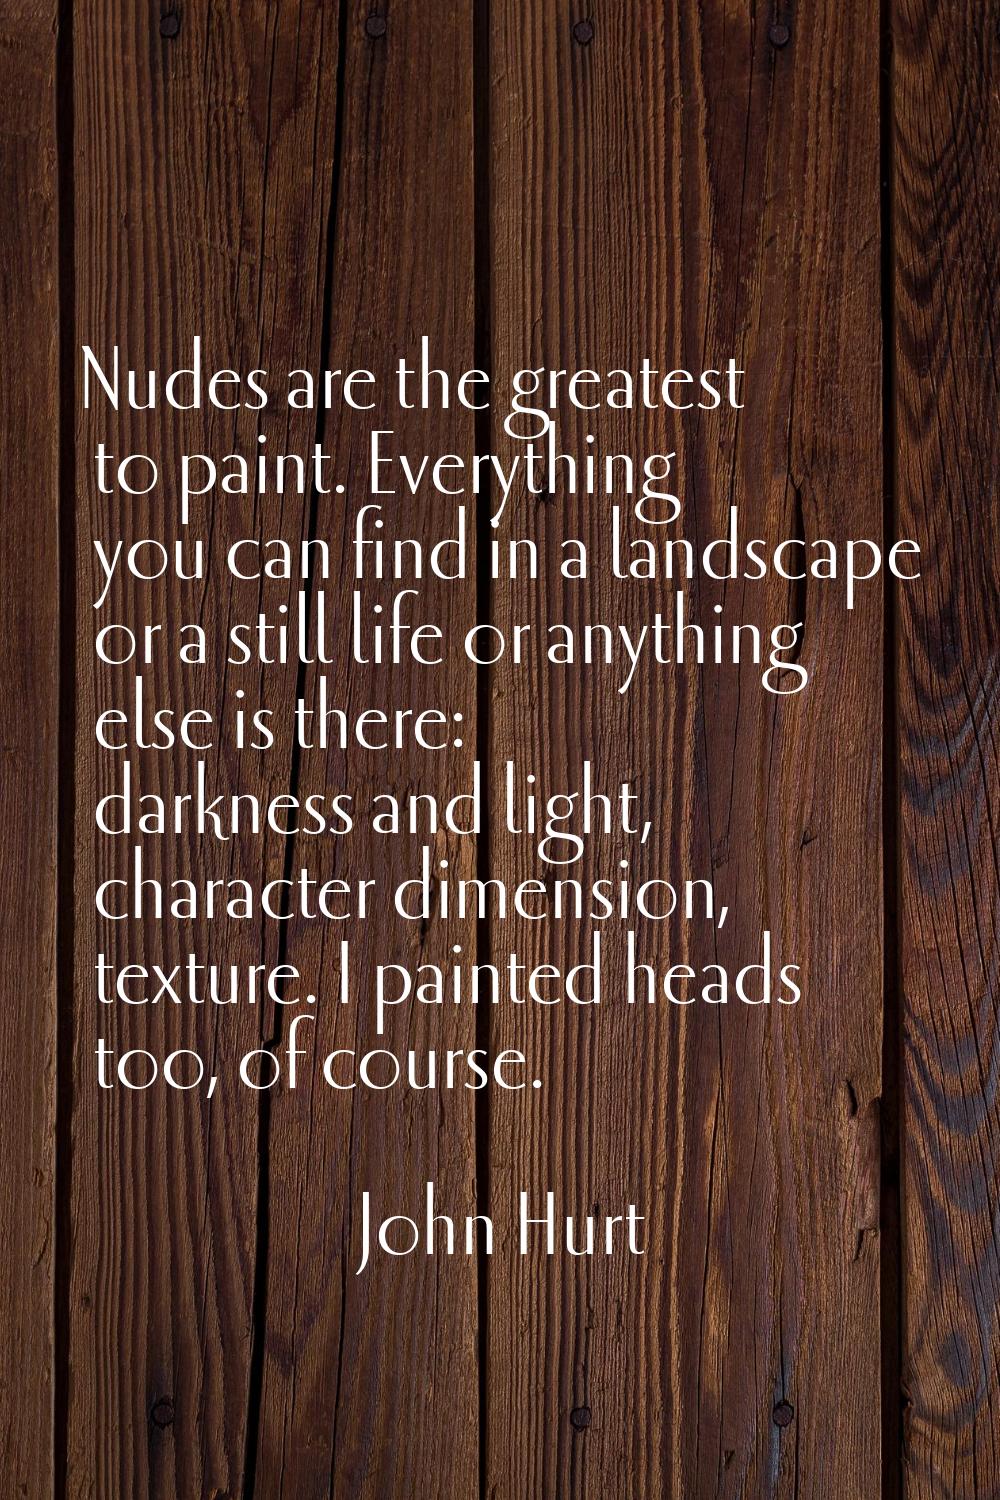 Nudes are the greatest to paint. Everything you can find in a landscape or a still life or anything